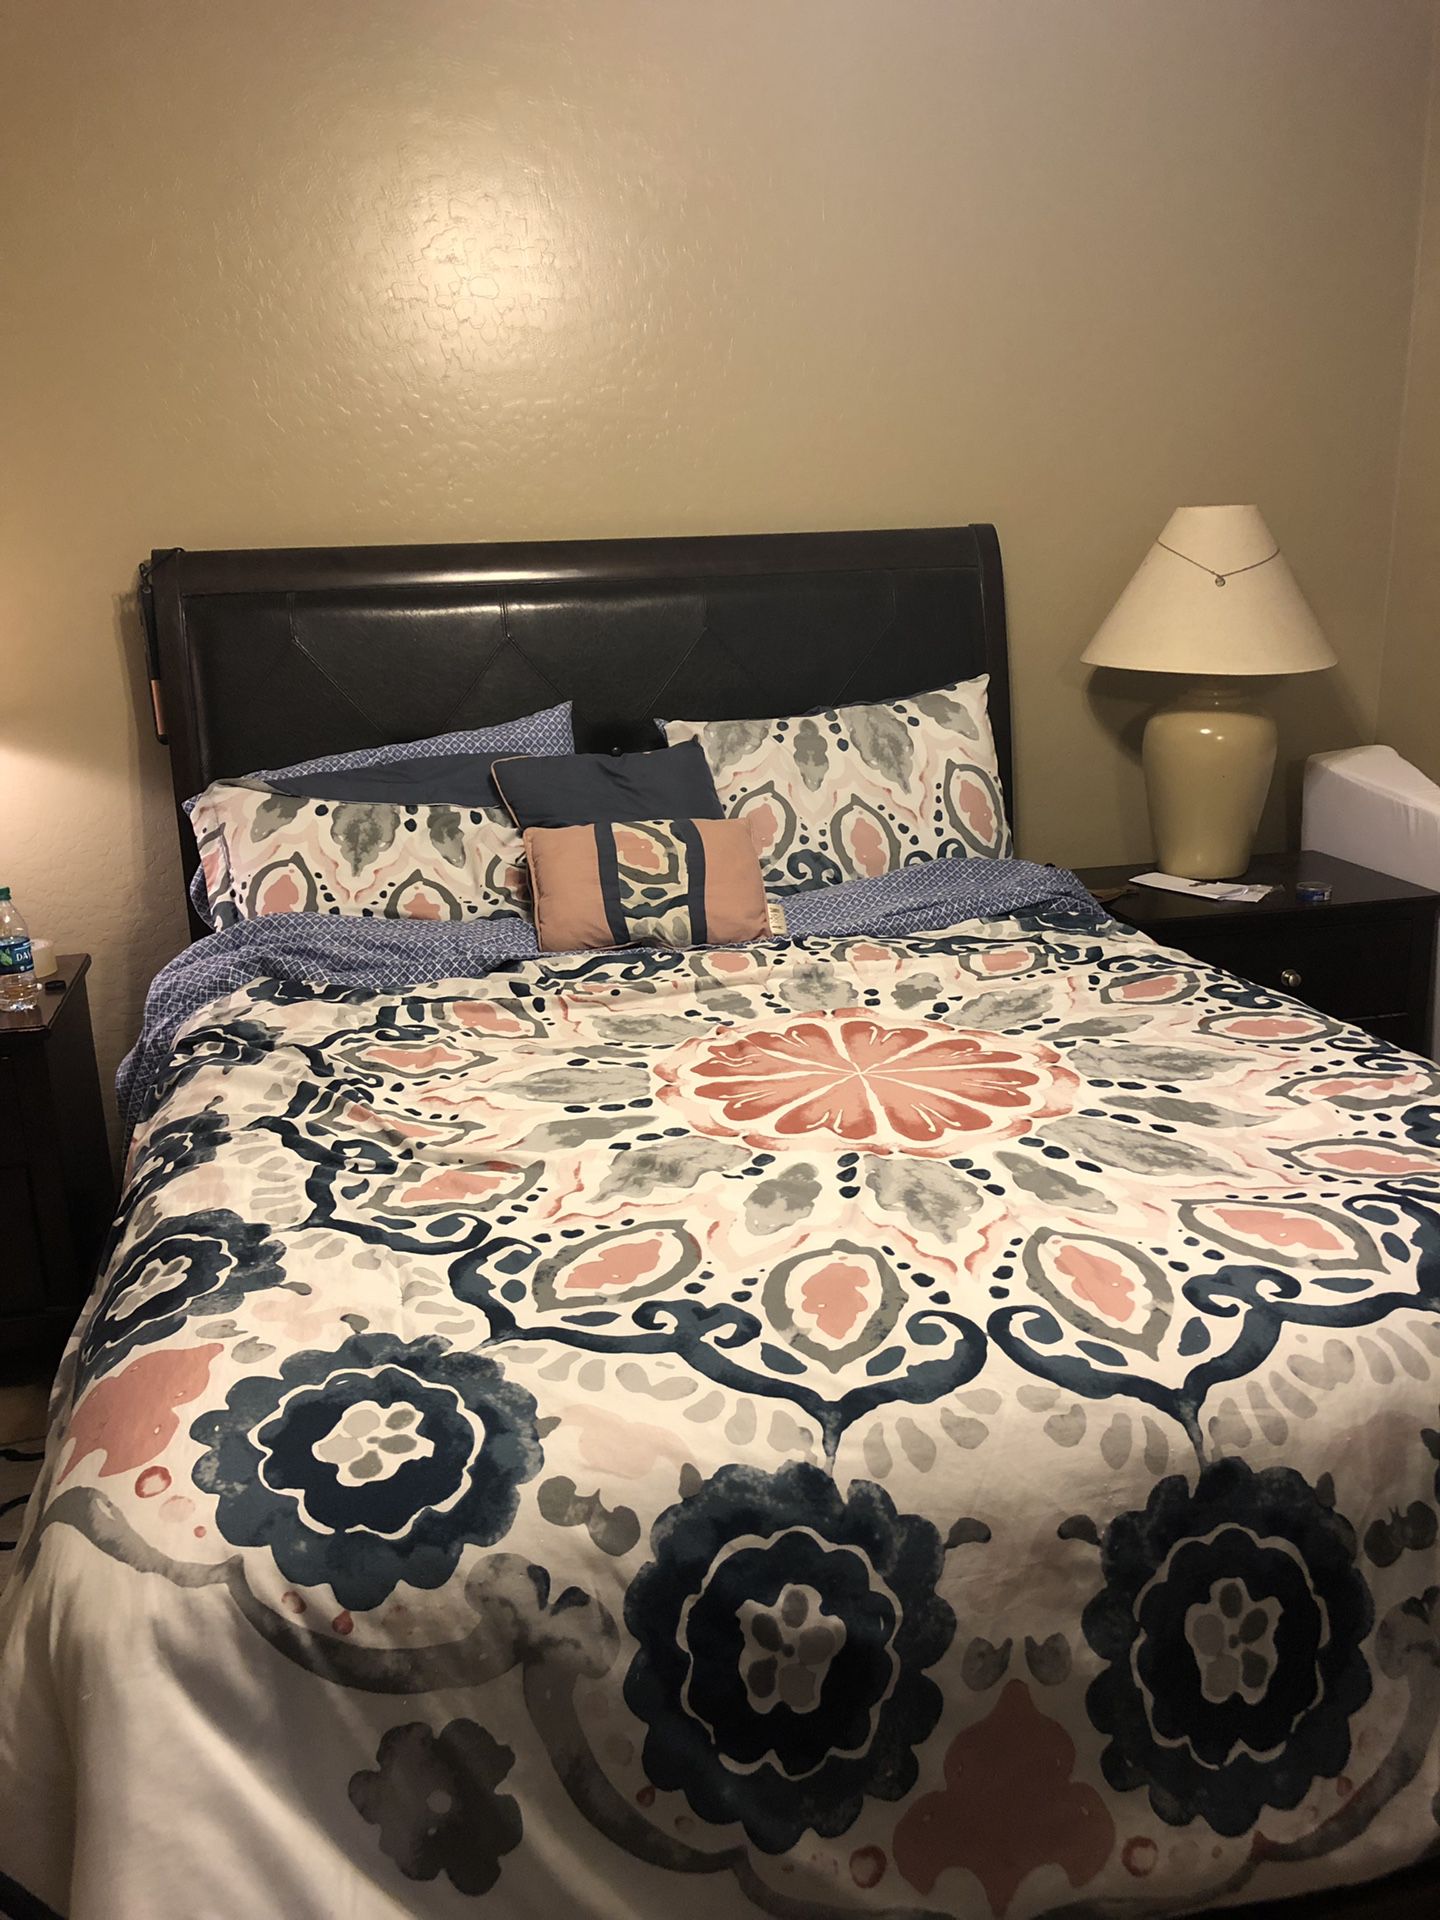 Queen size bed. Mattress and box spring included. Included lamps and night stand plus big dresser with mirror. Well taken care of. Color is dark wood